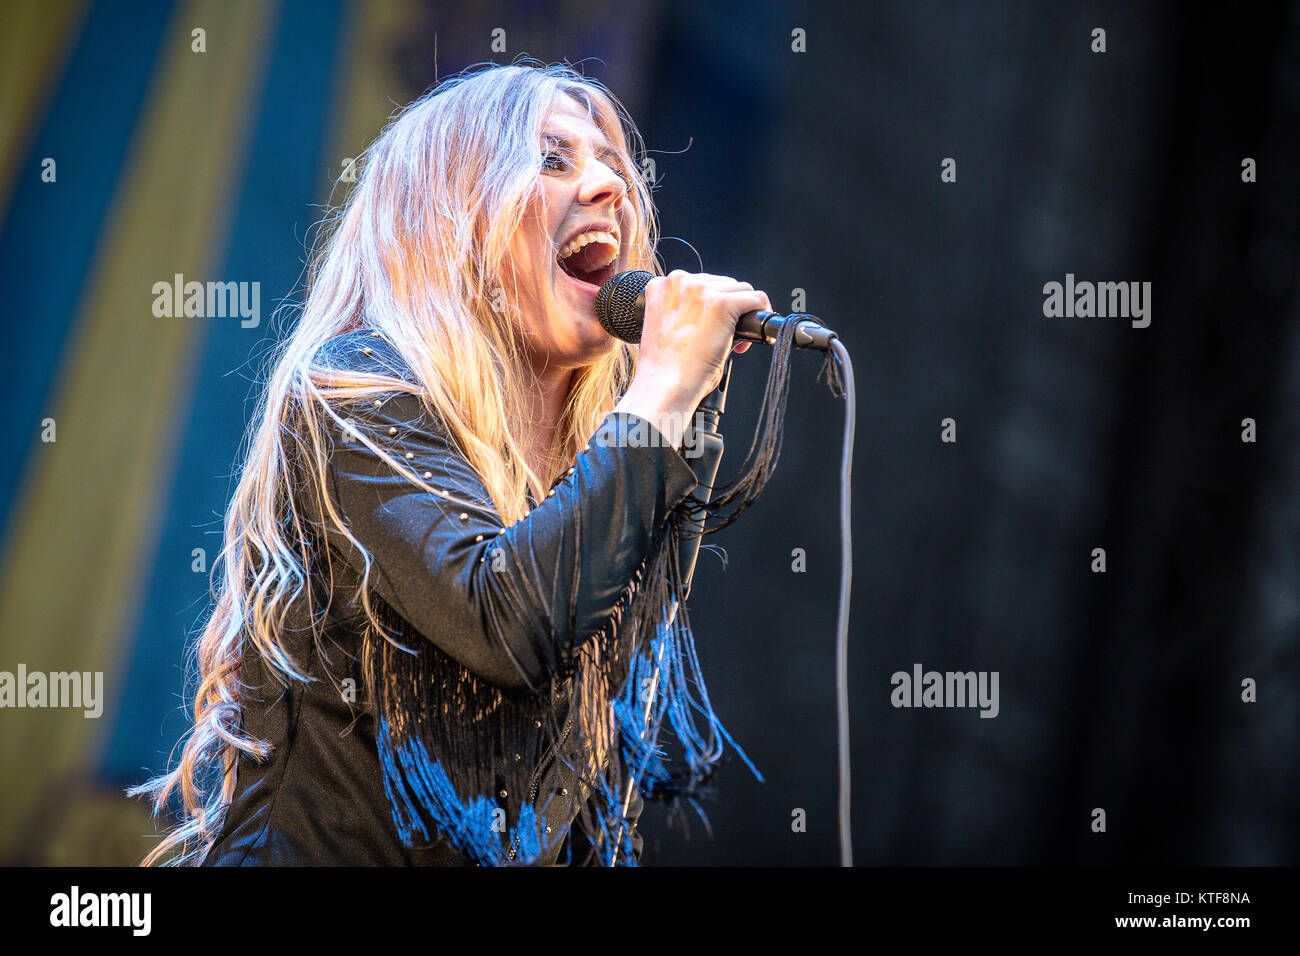 The Swedish rock band Blues Pills performs a live concert at the Norwegian music festival Tons of Rock 2016. Here singer Elin Larsson is seen live on stage. Norway, 23/06 2016. Stock Photo